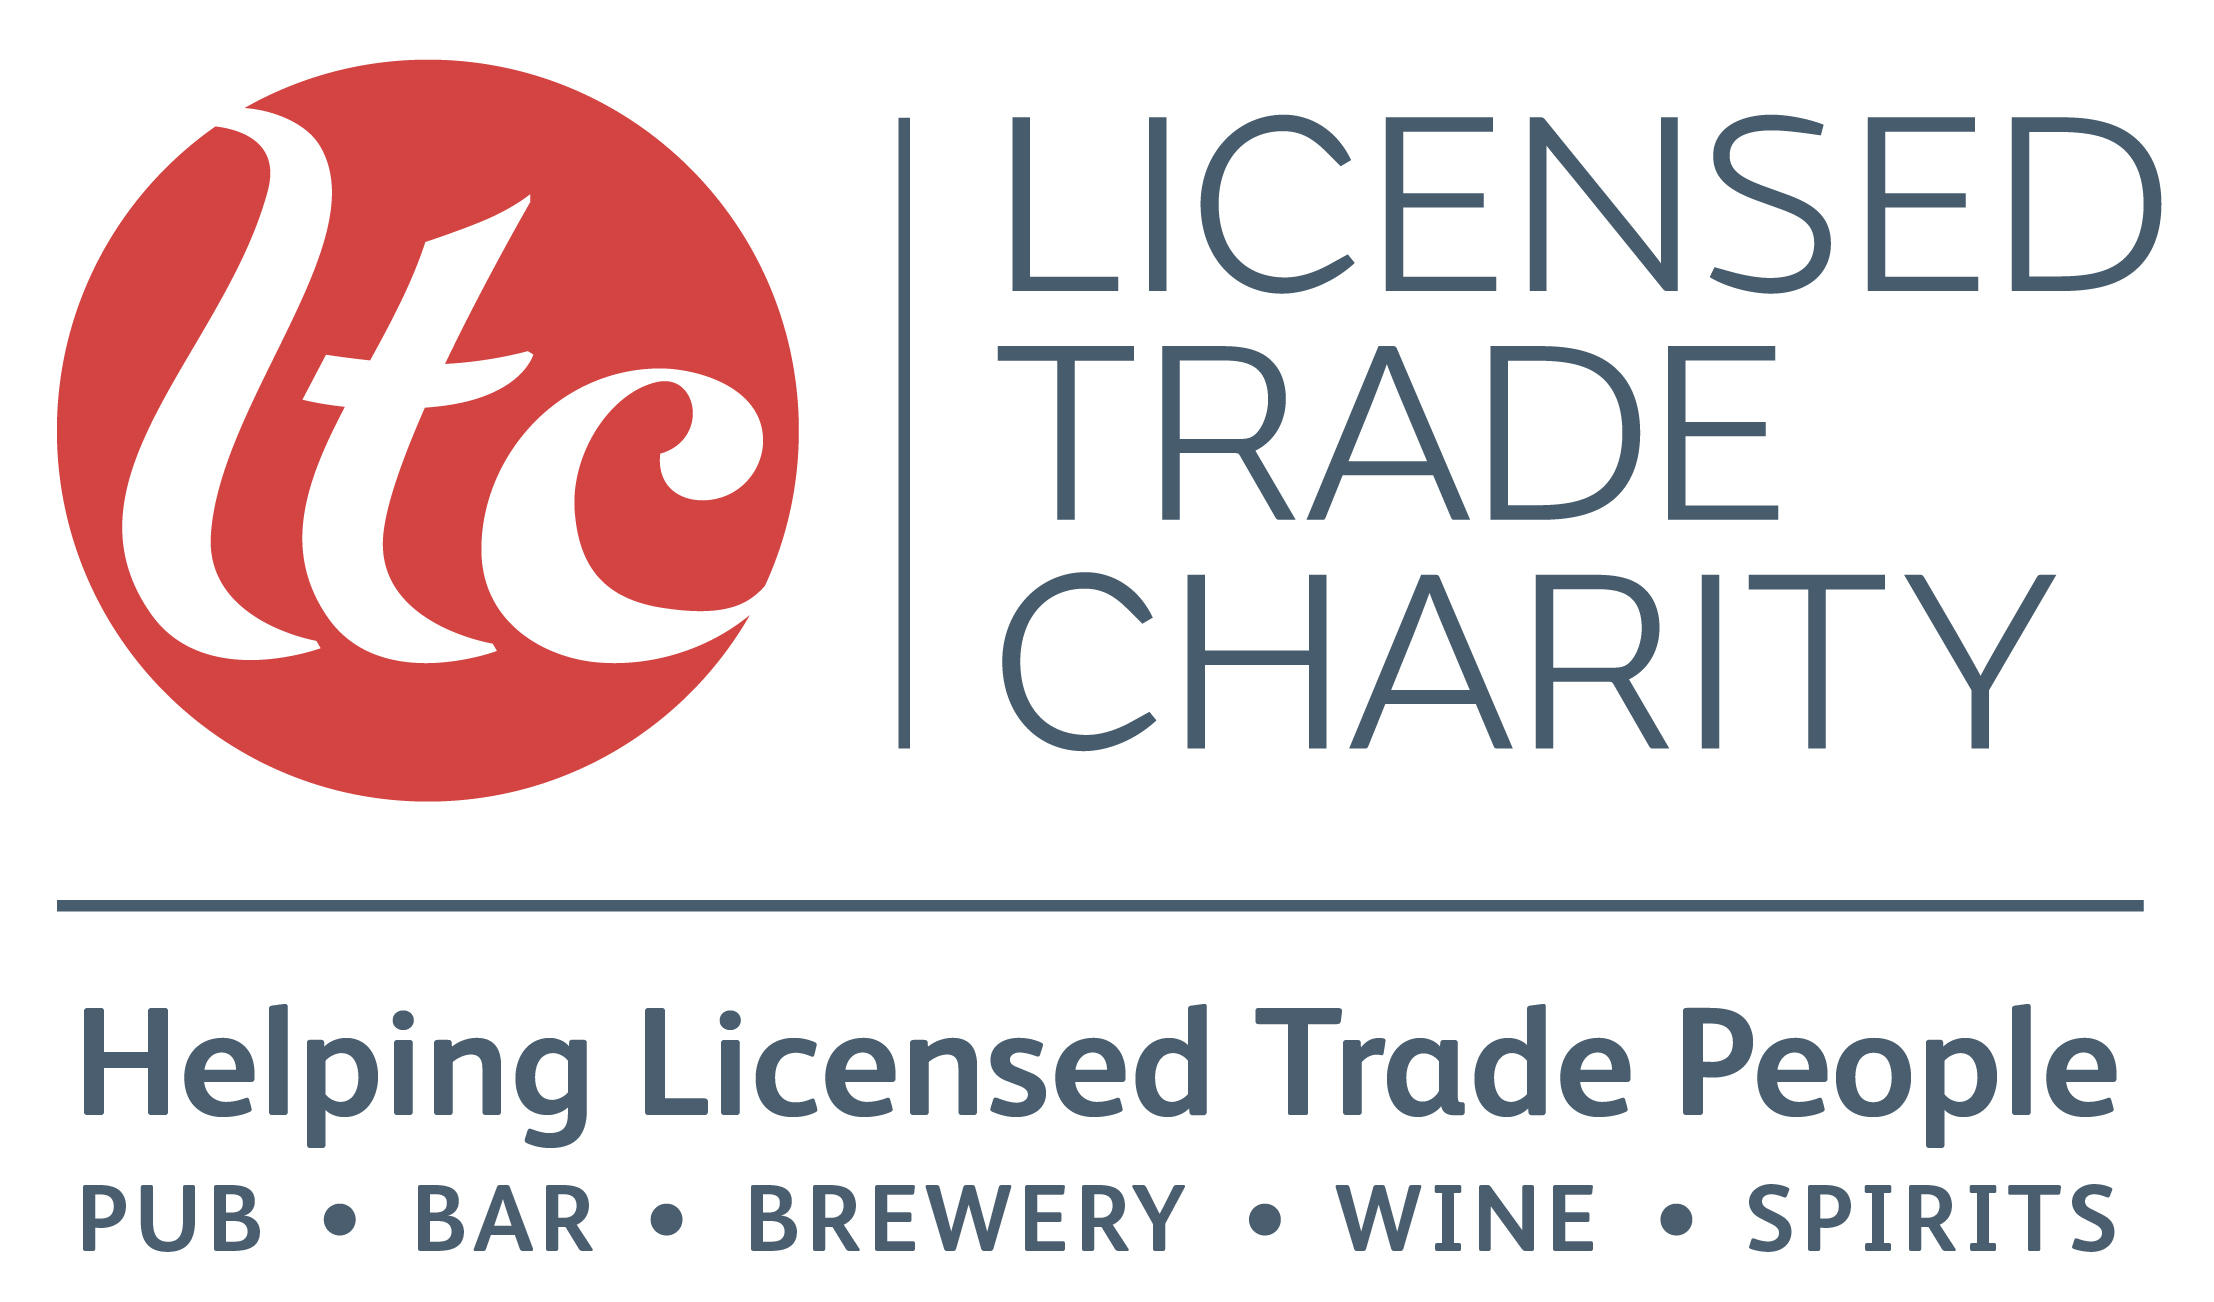 Licensed Trade Charity